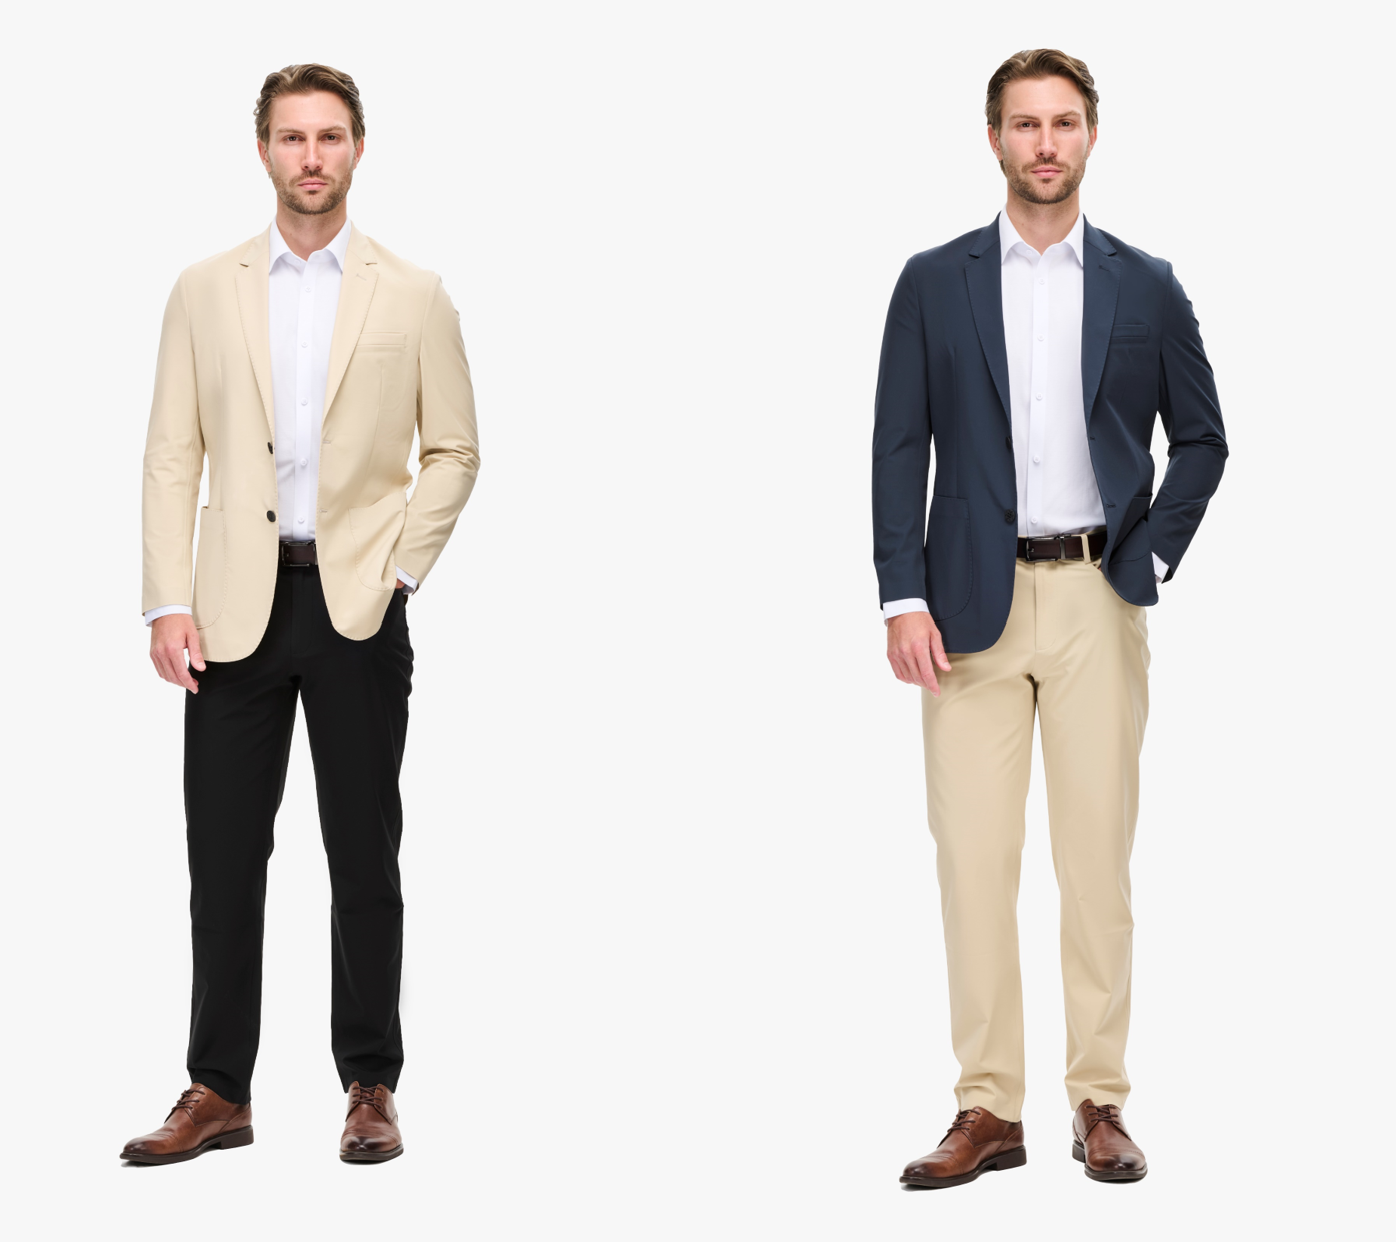 Summer Suit Secrets: Choosing the Right Colors and Fabrics